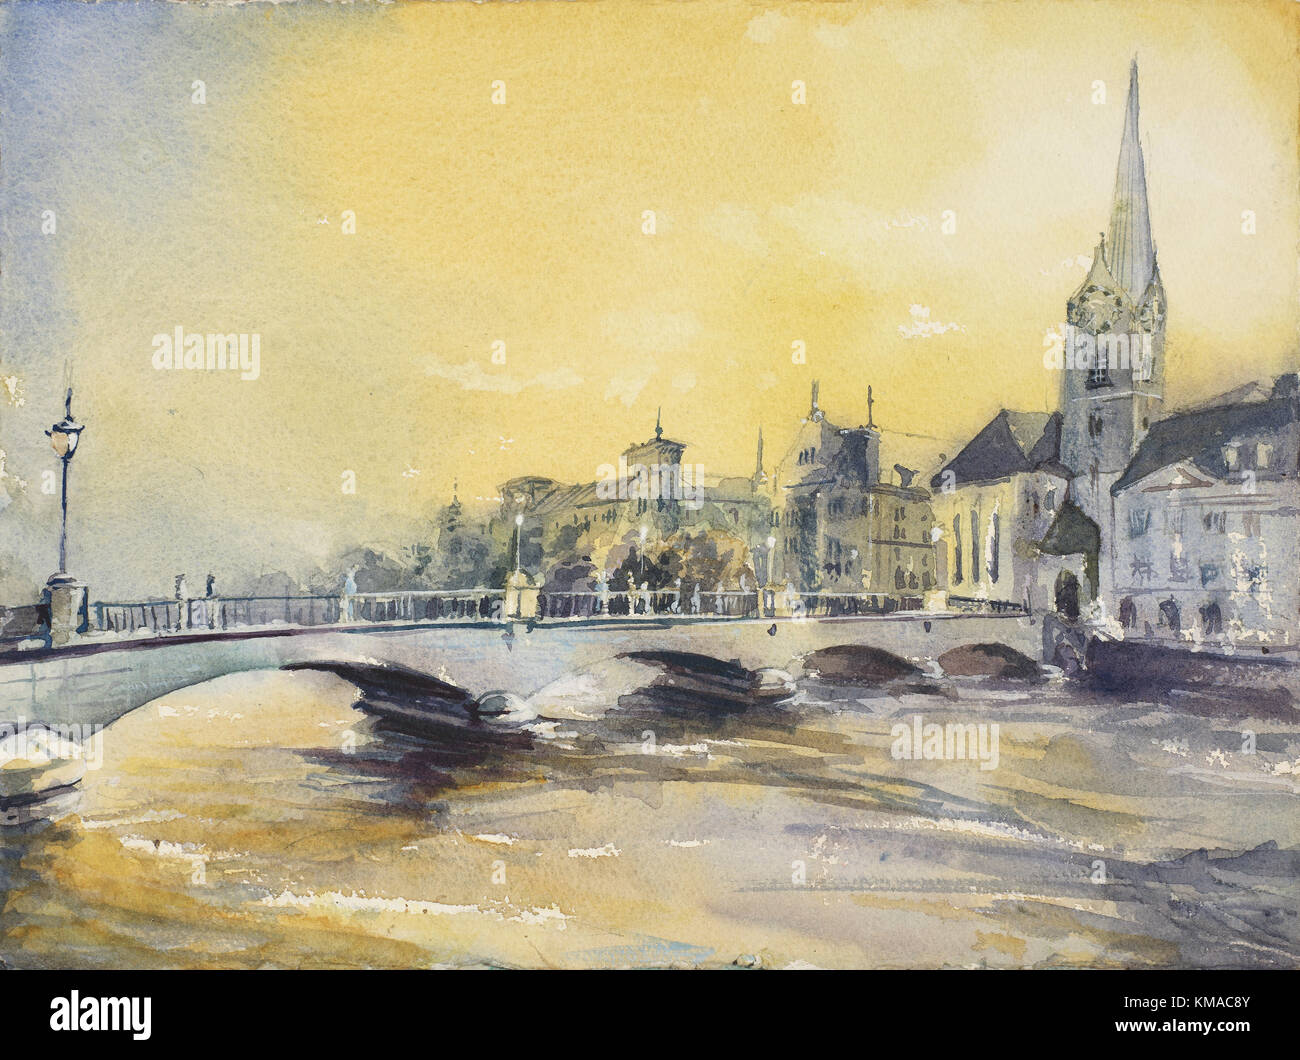 Watercolor painting of medieval city of Zurich, Switzerland at dusk Stock Photo